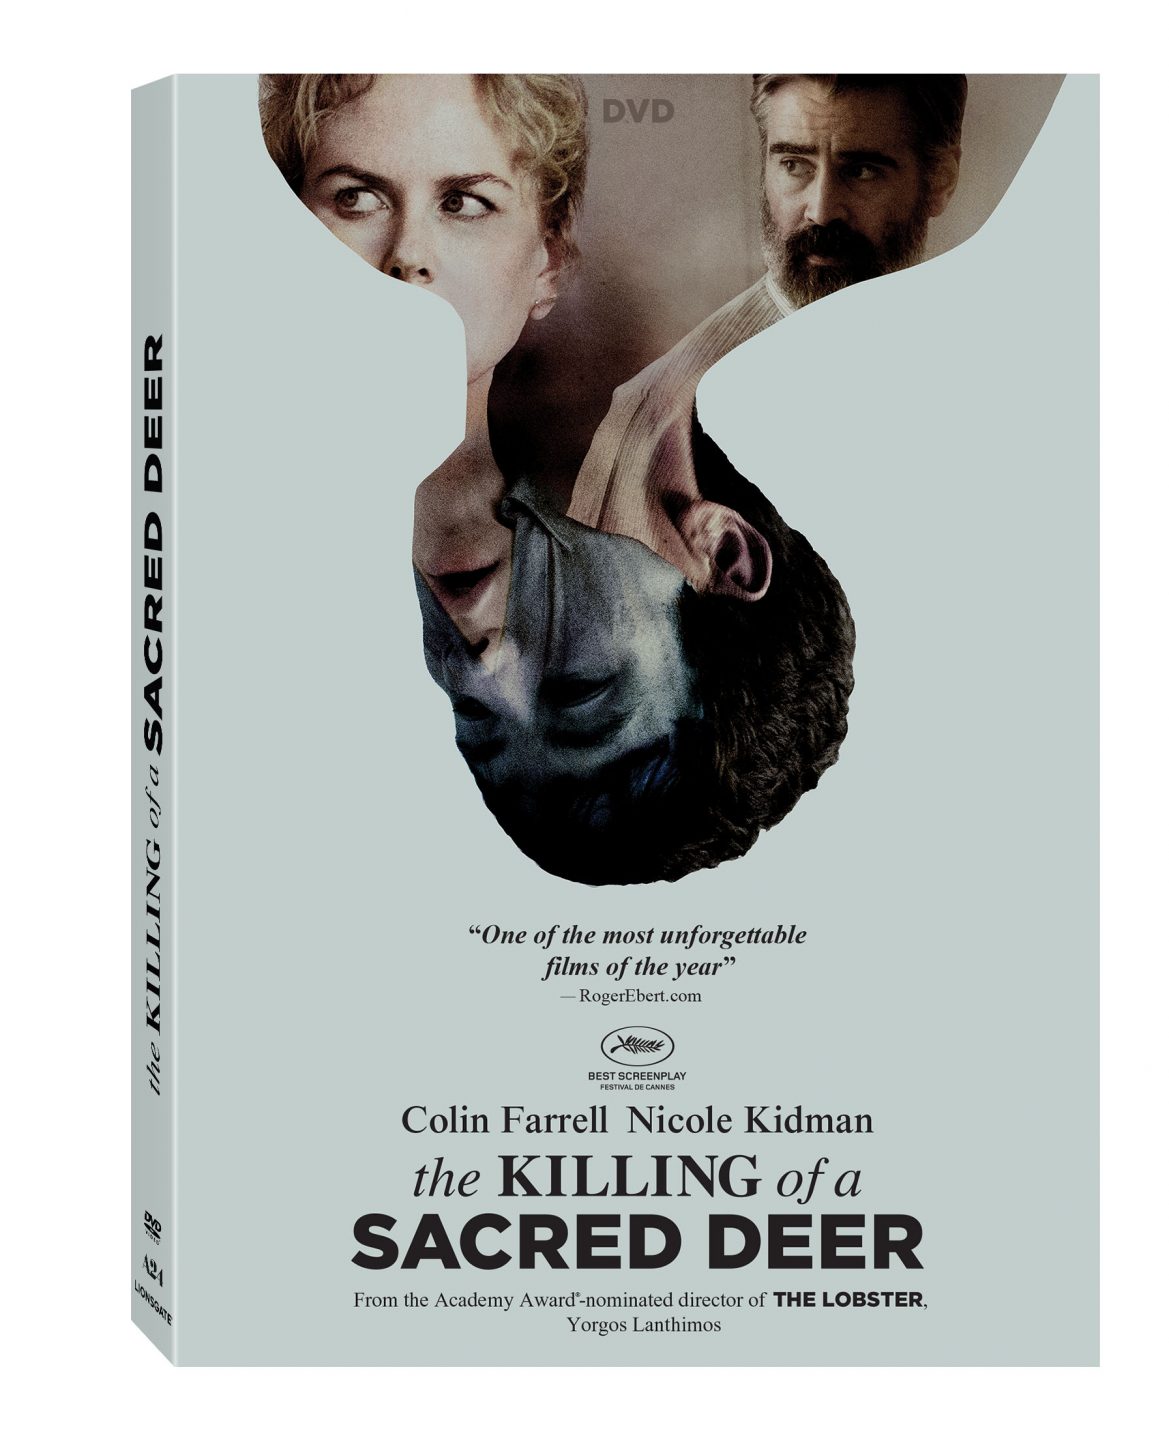 The Killing Of A Sacred Deer DVD cover(Lionsgate Home Entertainment)